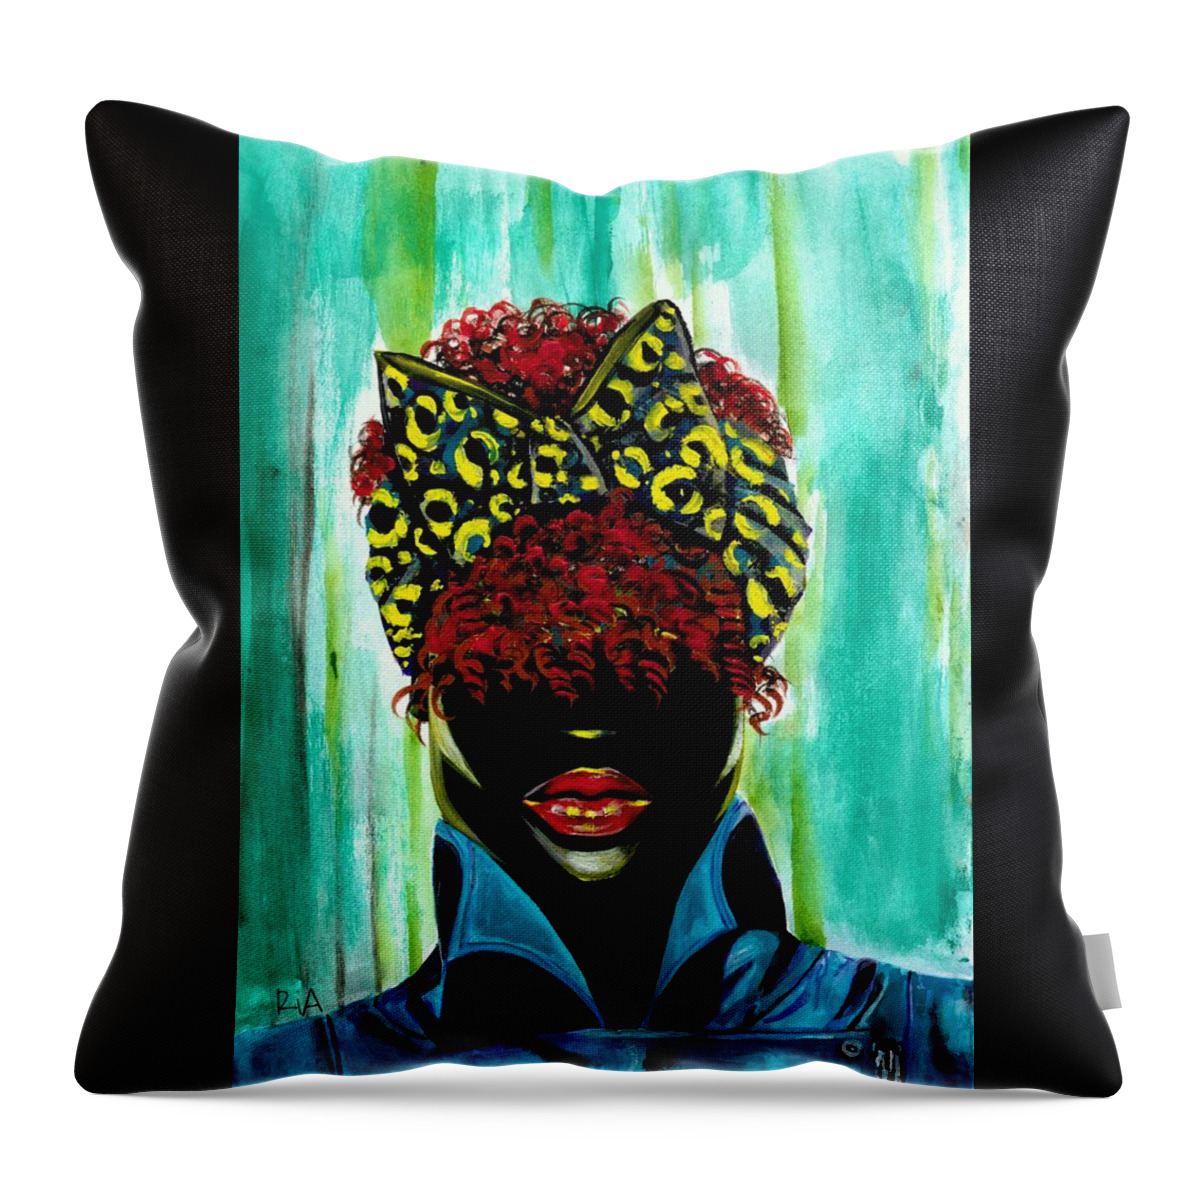 Black Throw Pillow featuring the photograph Neon by Artist RiA